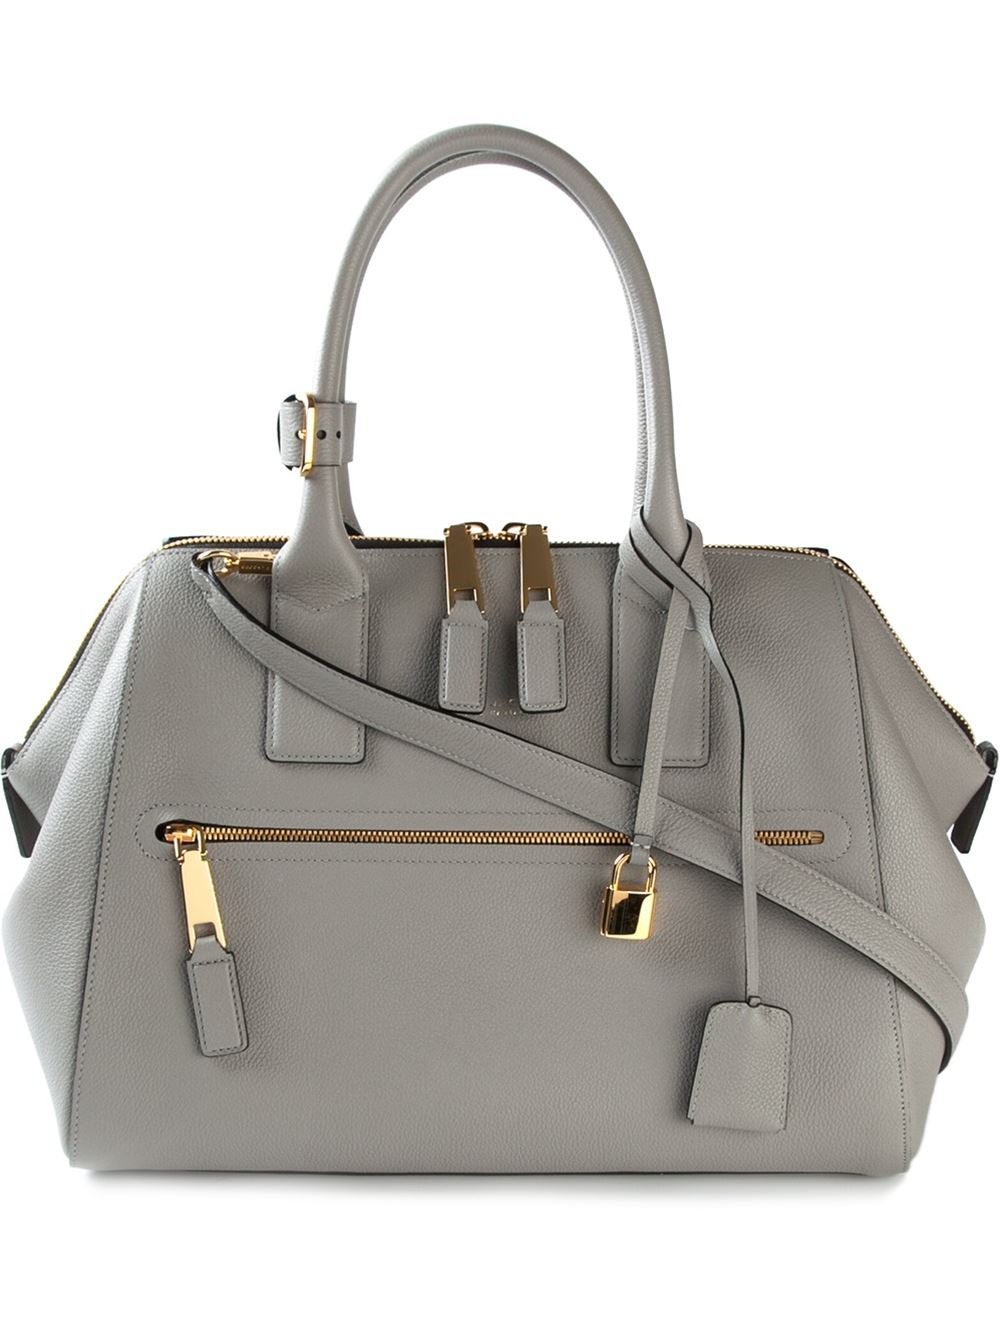 Marc jacobs 'incognito' Tote in Gray (grey) | Lyst